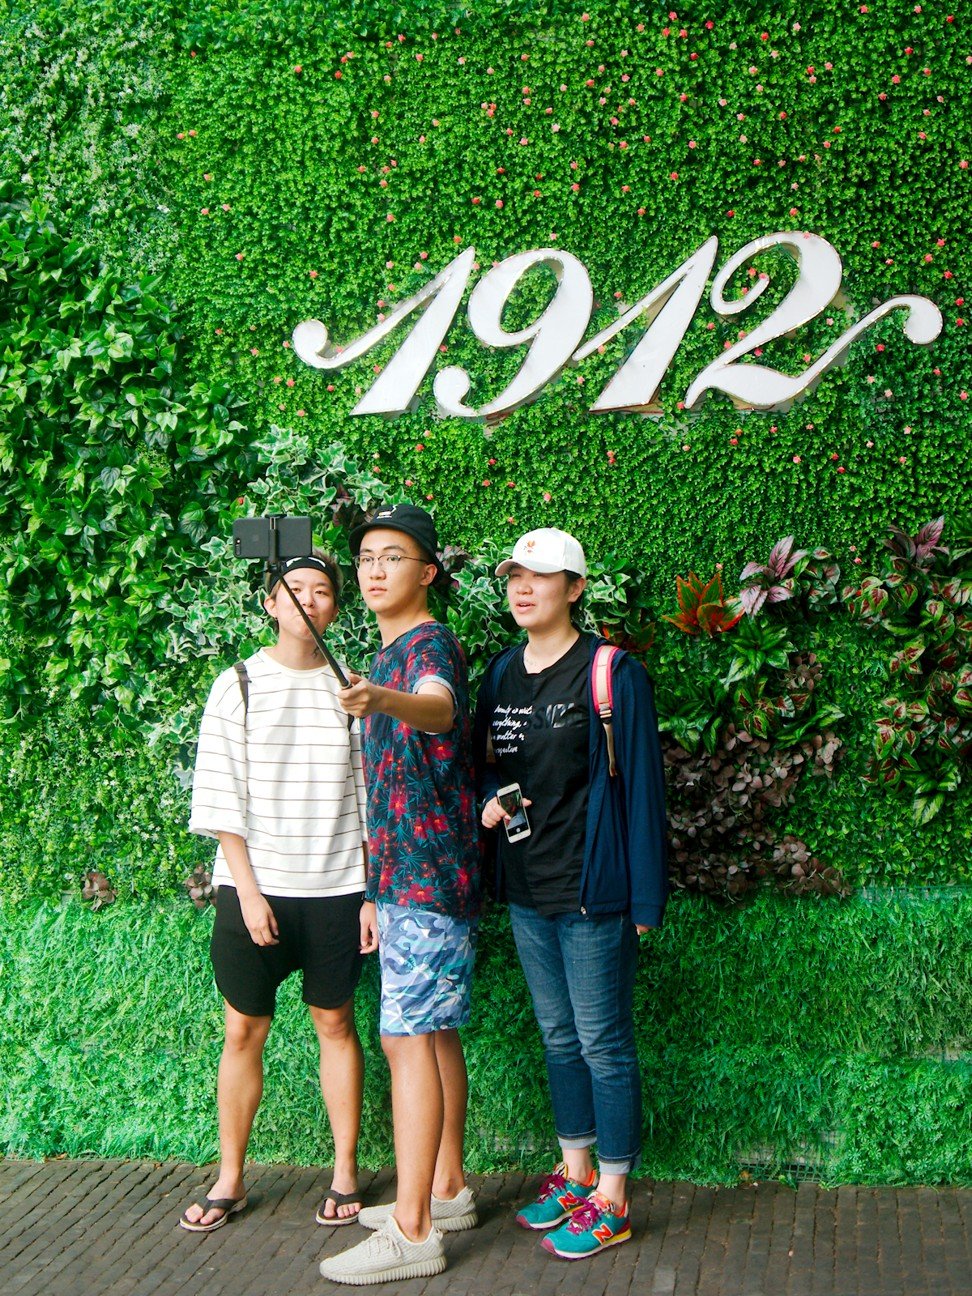 Tourists pose for selfies at the 1912 nightlife district in Nanjing. Photo: Stuart Heaver